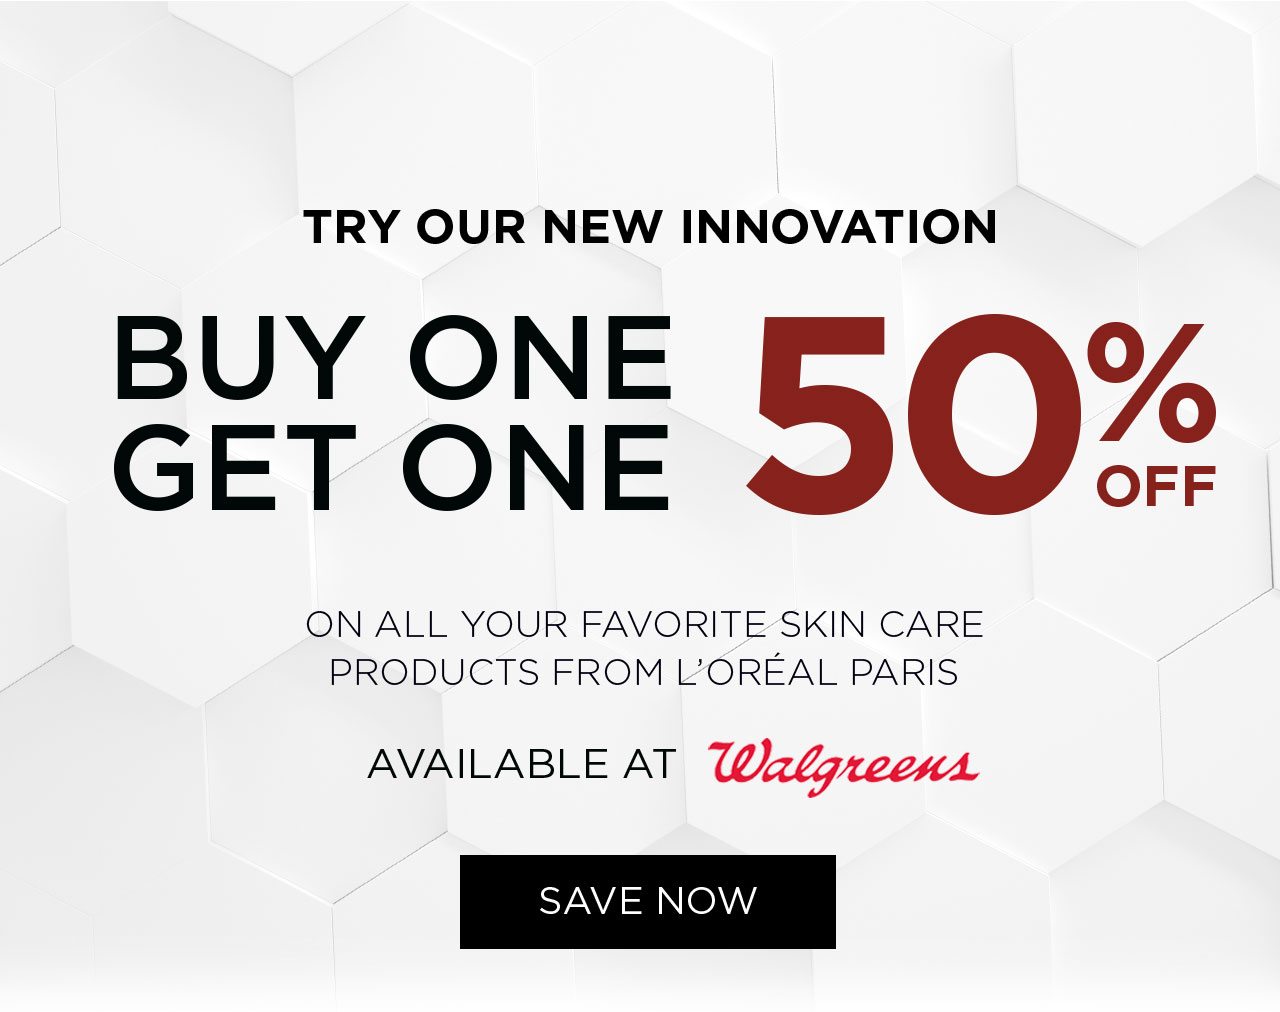 TRY OUR NEW INNOVATION - BUY ONE GET ONE 50 PERCENT OFF - ON ALL YOUR FAVORITE SKIN CARE PRODUCTS FROM L'ORÉAL PARIS - AVAILABLE AT Walgreens - SAVE NOW